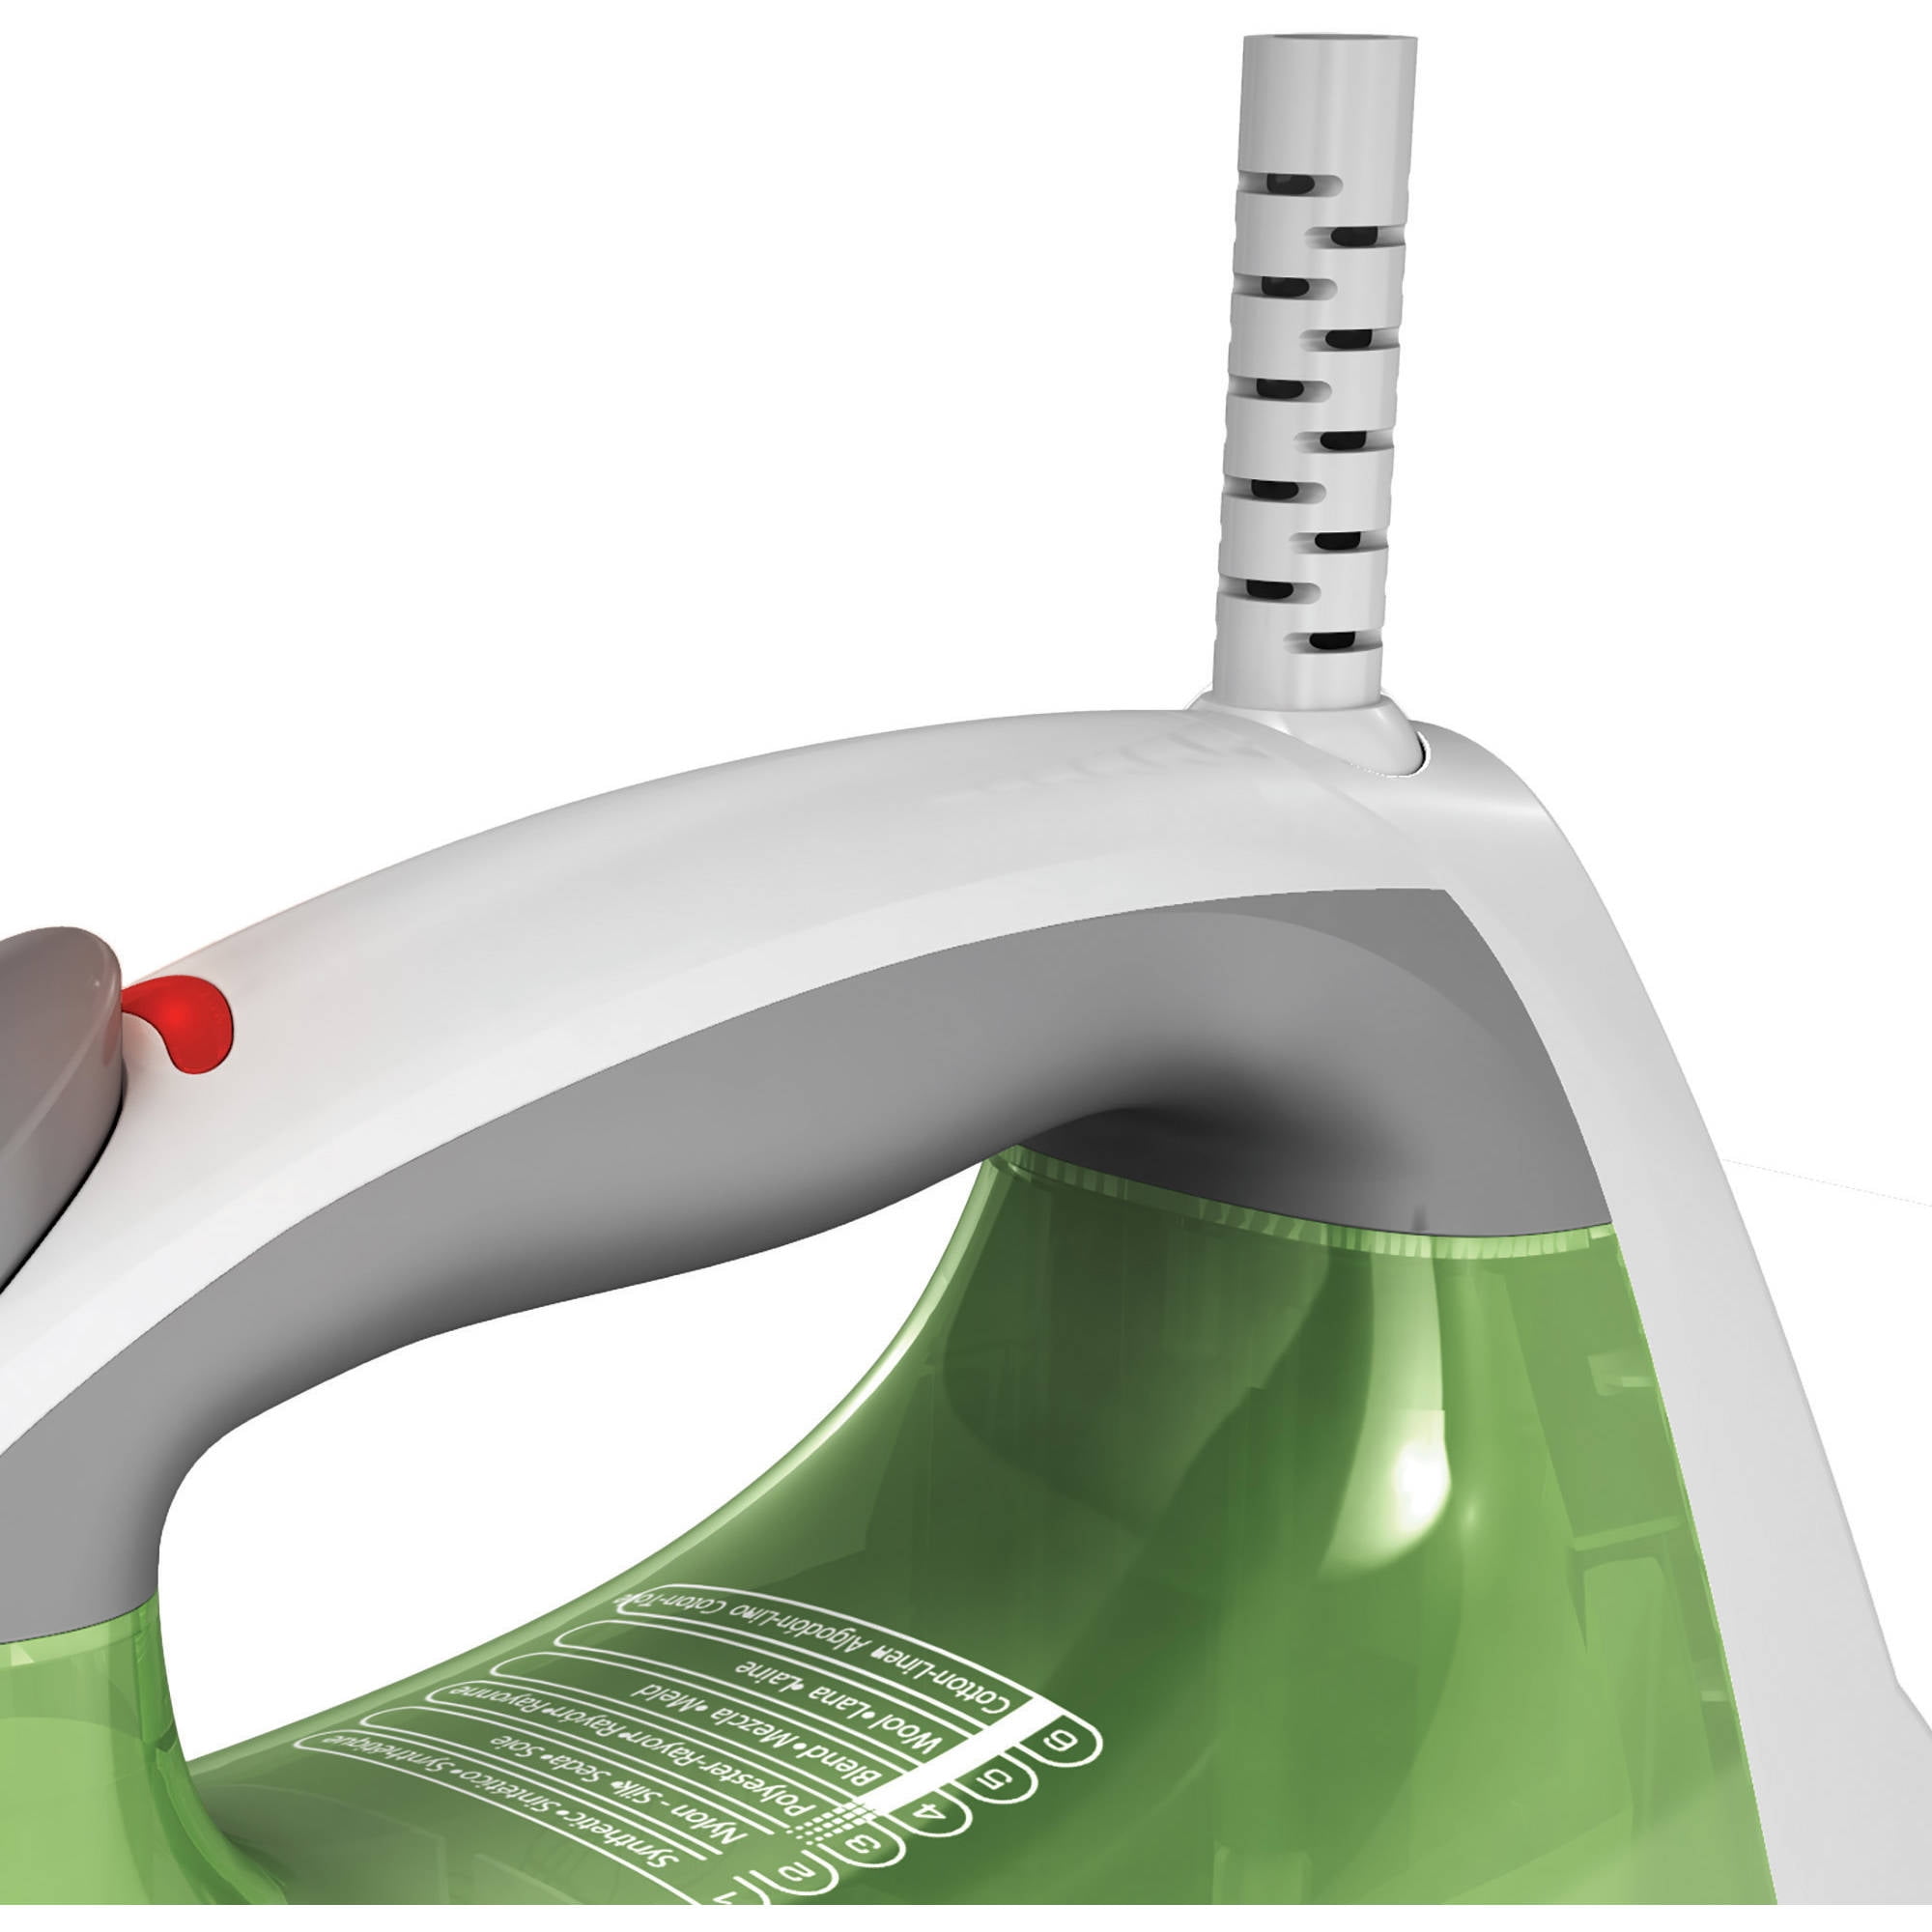 Black & Decker Classic Iron from Aircraft Spruce Europe